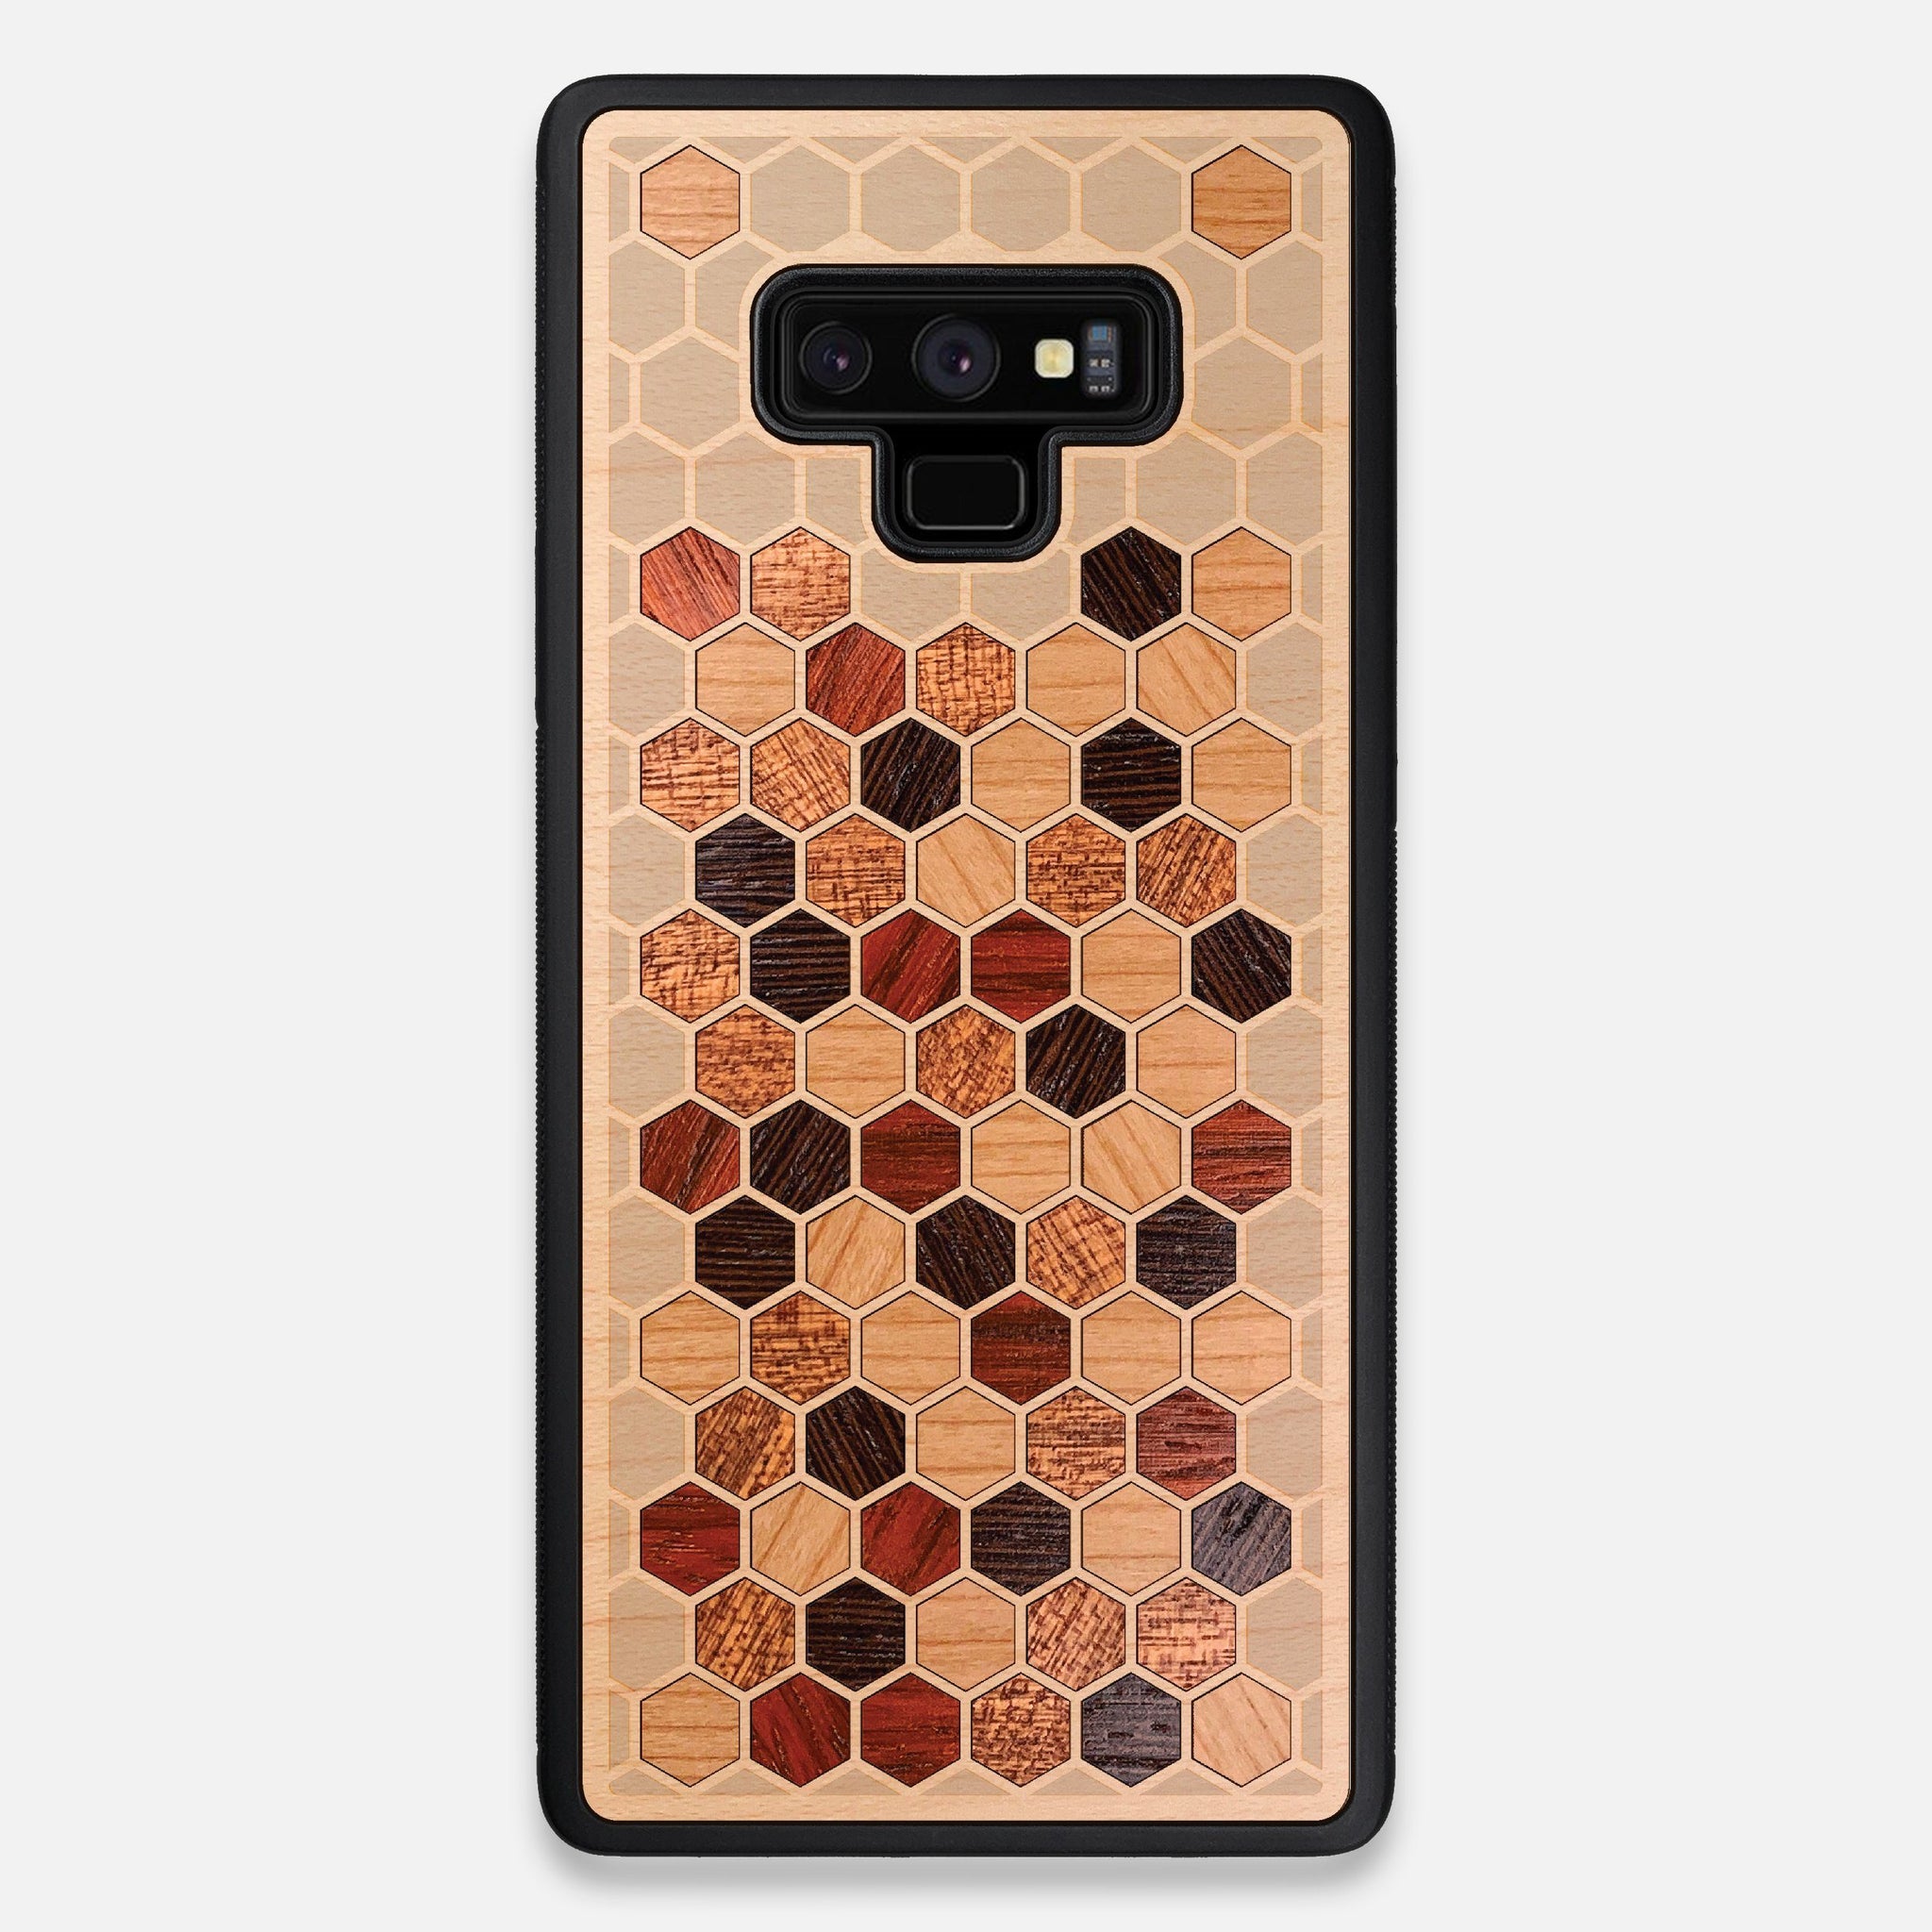 Front view of the Cellular Maple Wood Galaxy Note 9 Case by Keyway Designs